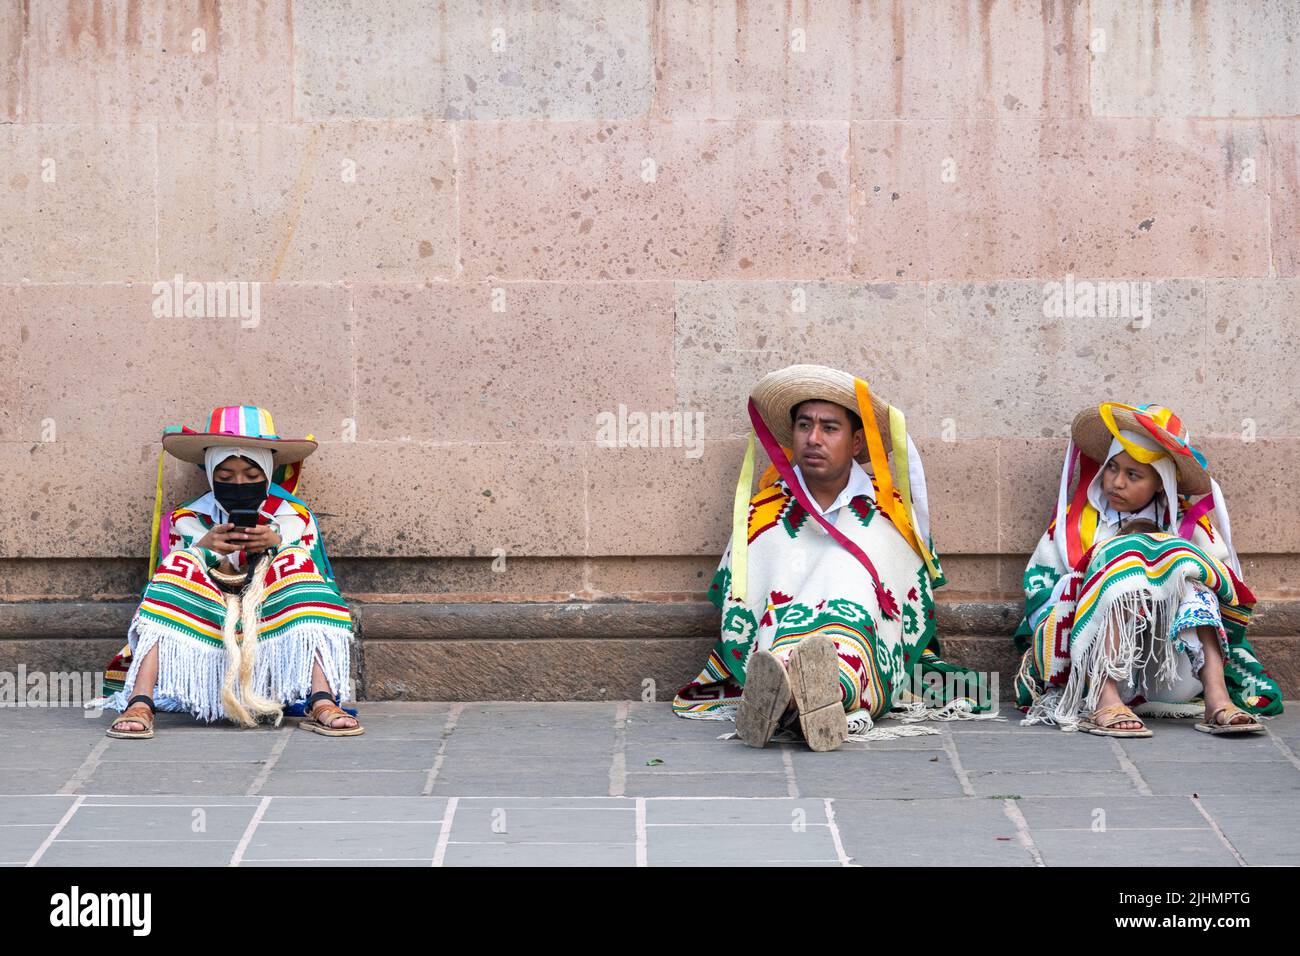 Young Mexican boys, dressed in costume, take a break from performing the Danza de los Viejitos outside the Basílica de Nuestra Señora de la Salud, or Basilica of Our Lady of Health, during celebration of the traditional Sunday service marking the start of holy week, April 10, 2022 in Patzcuaro, Michoacan, Mexico. Stock Photo